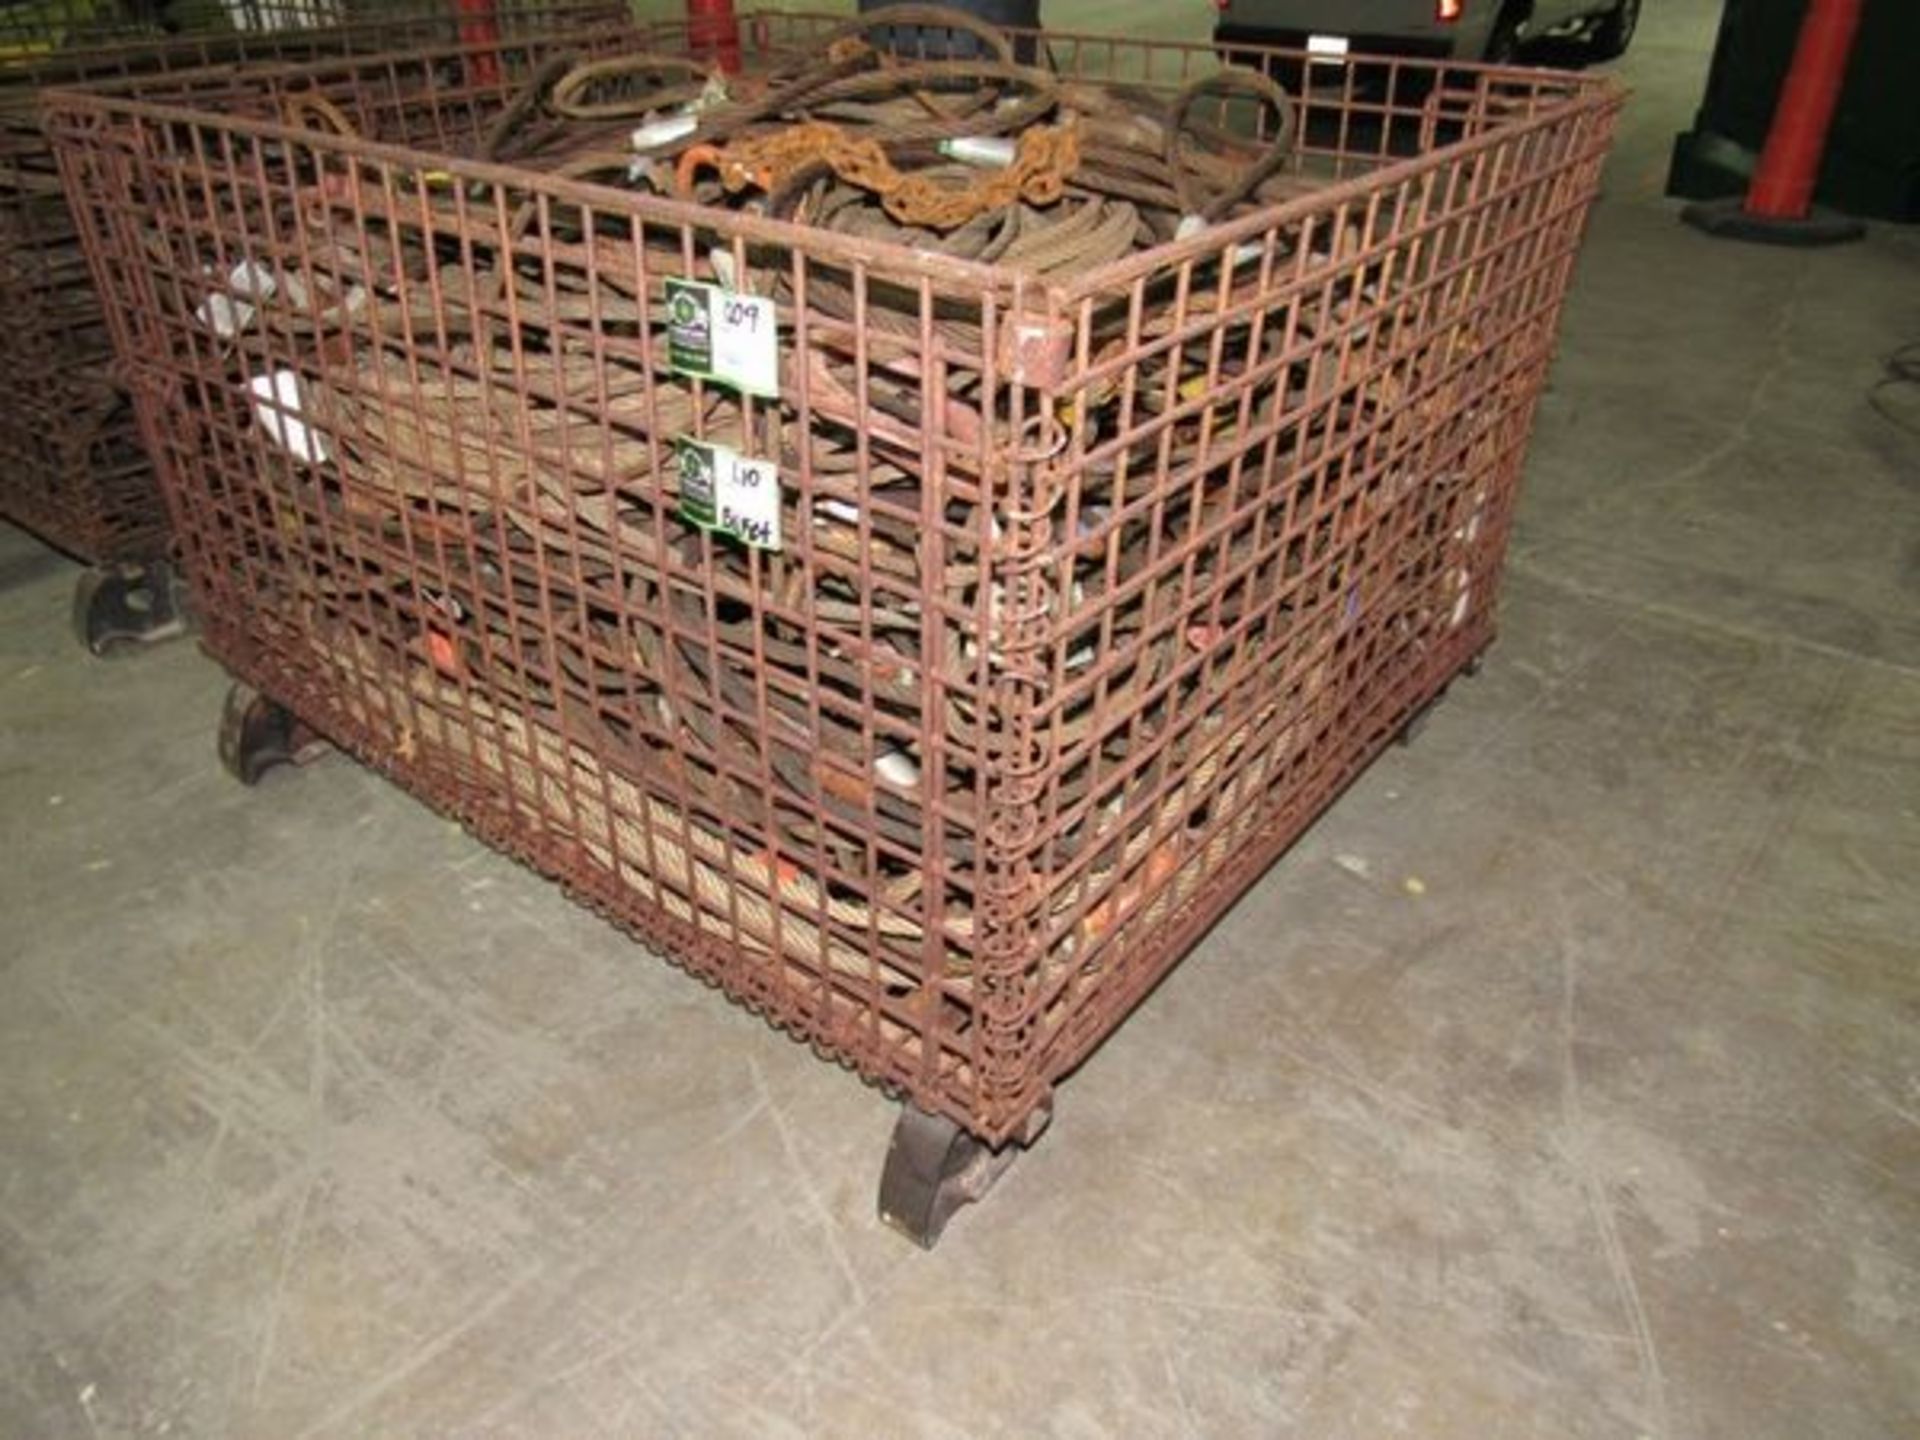 Warehouse Basket- MFR - Unknown 48" x 40" x 31" **Contents SOLD Separately in Lot#1209** - Image 2 of 7